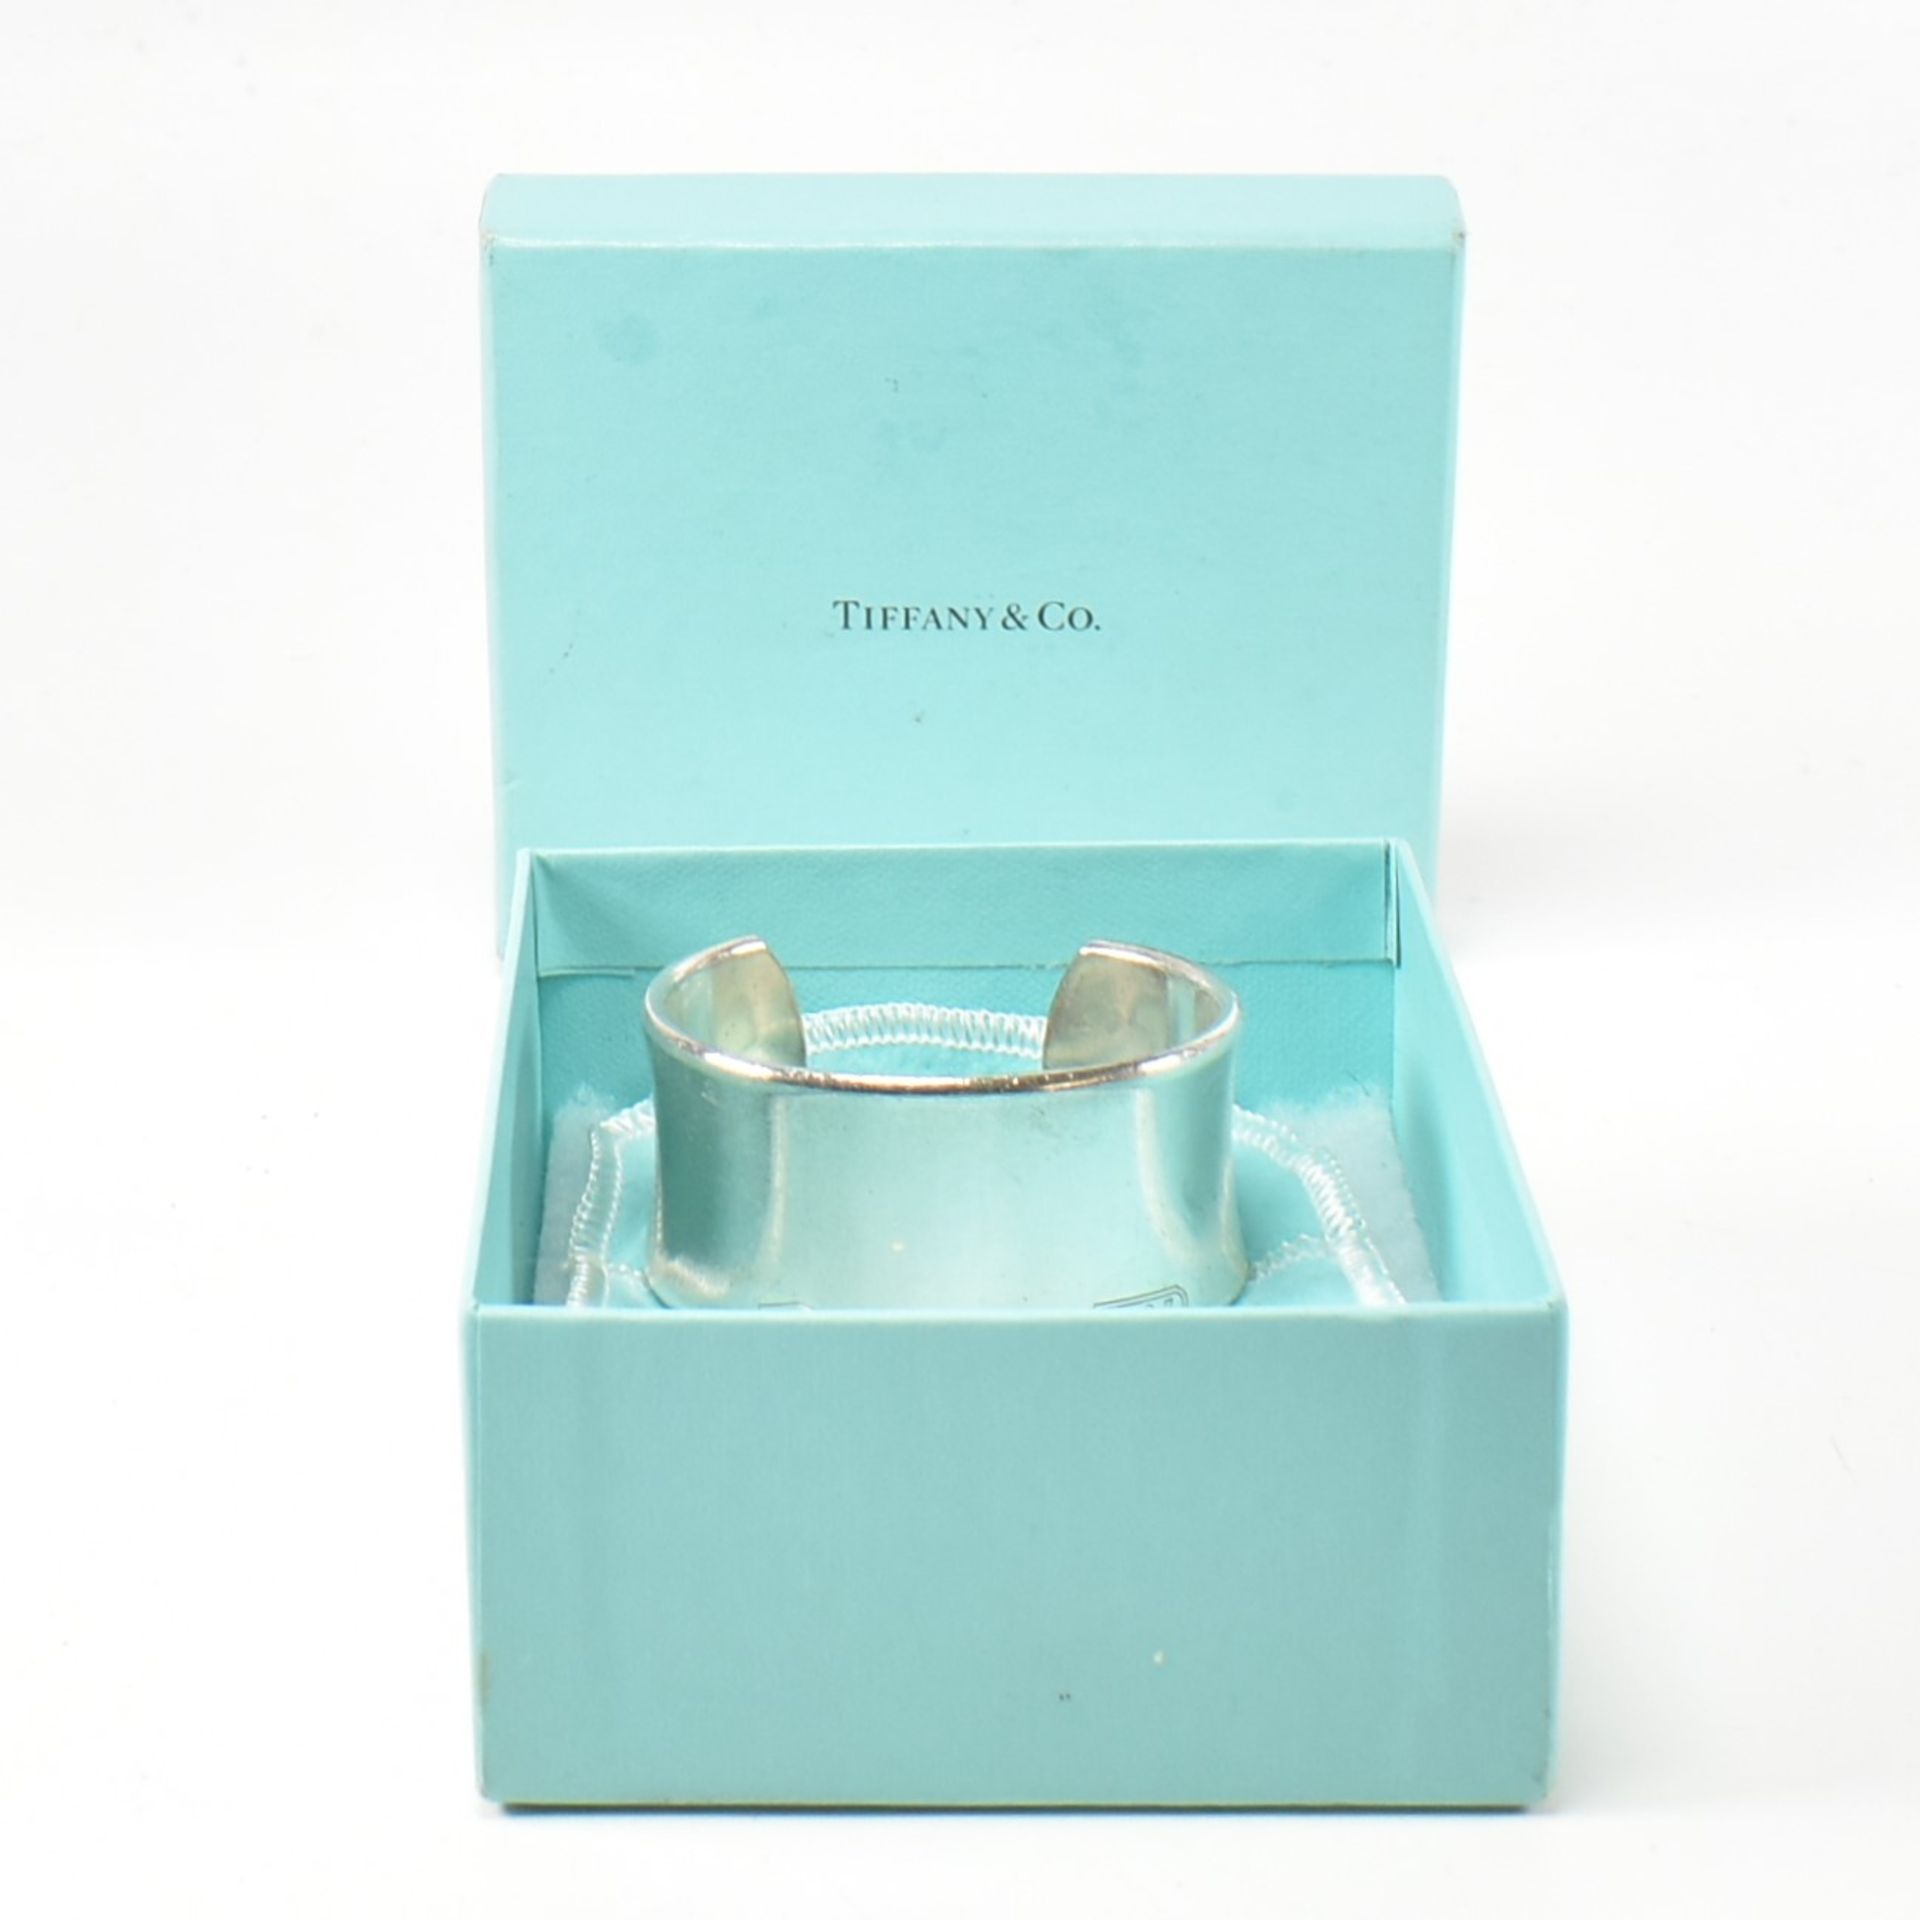 TIFFANY & CO 1837 STERLING SILVER WIDE CUFF BANGLE - Image 2 of 7